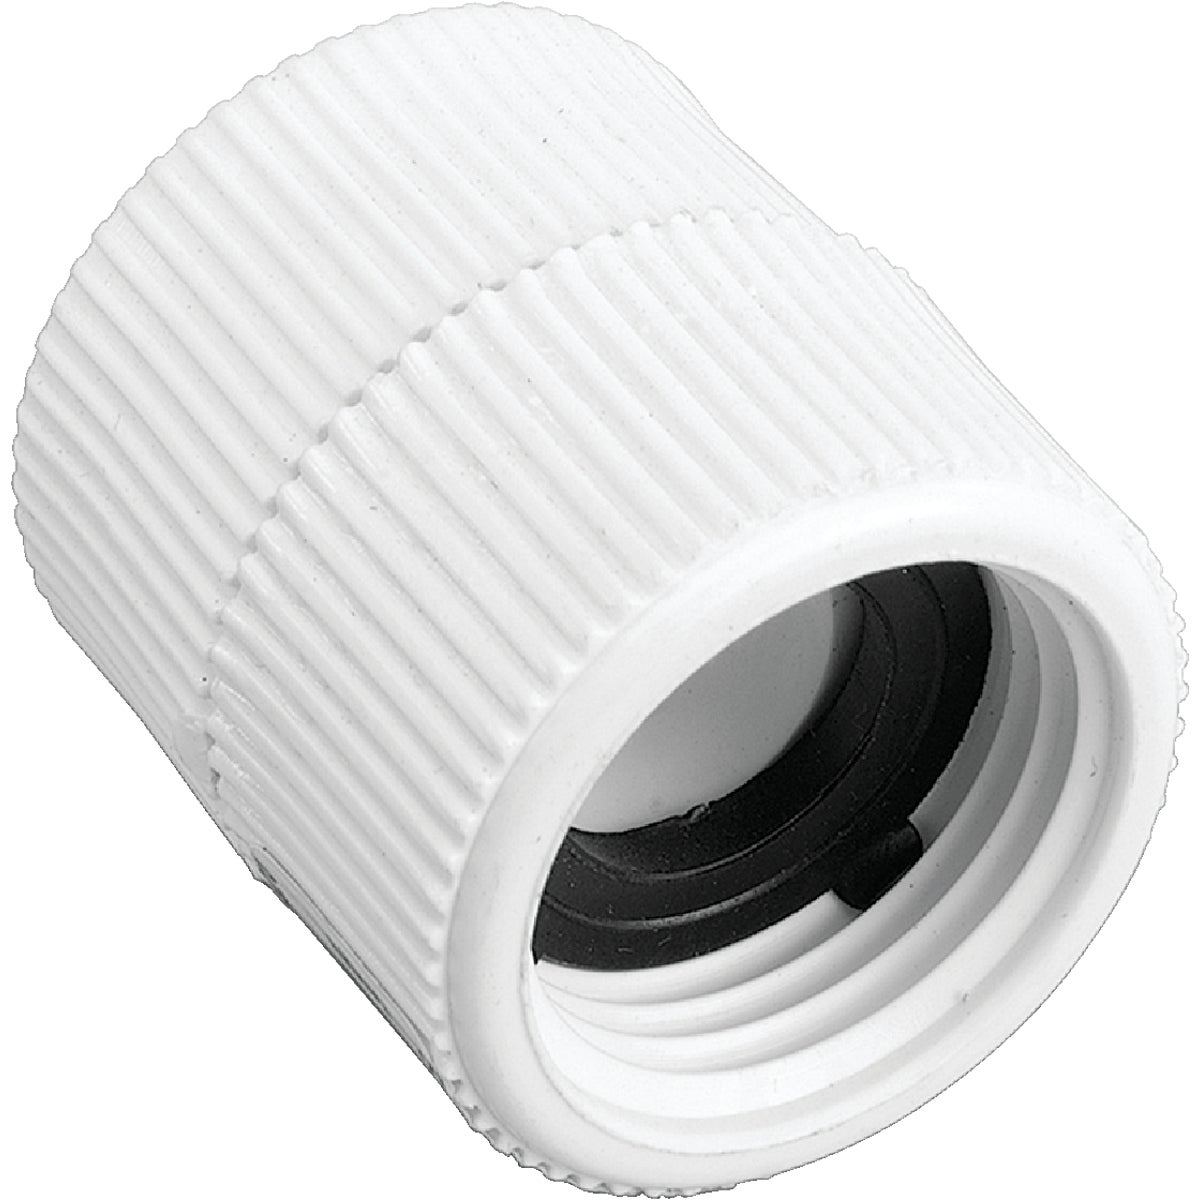 Item 703565, Swivel fitting connects garden to 3/4 In. pipe. High quality construction.